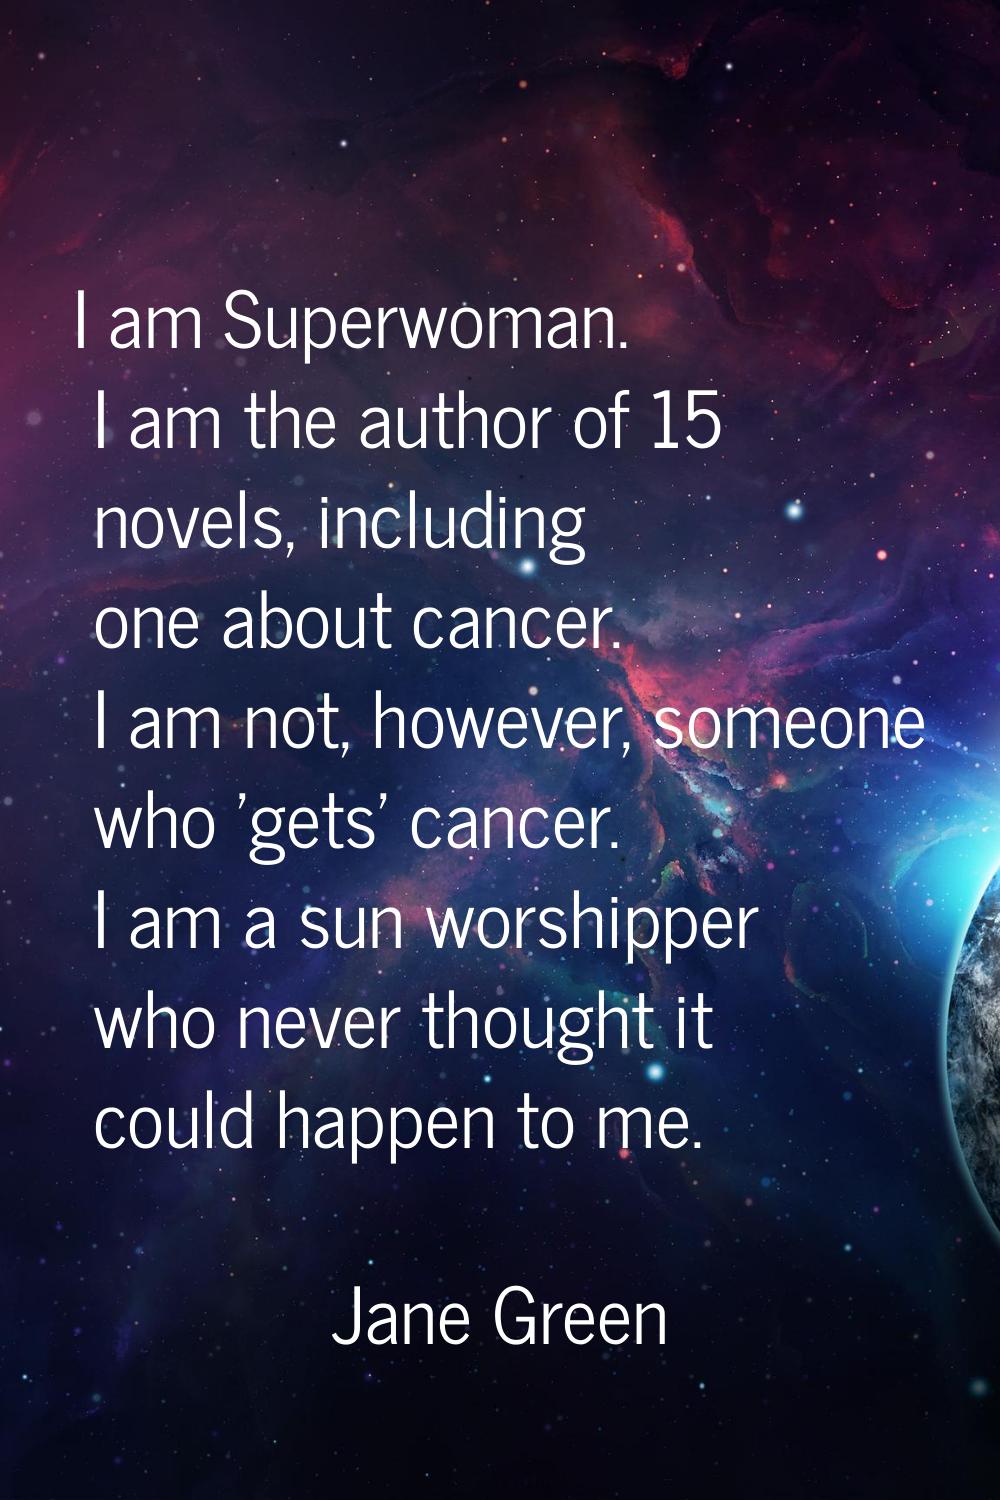 I am Superwoman. I am the author of 15 novels, including one about cancer. I am not, however, someo